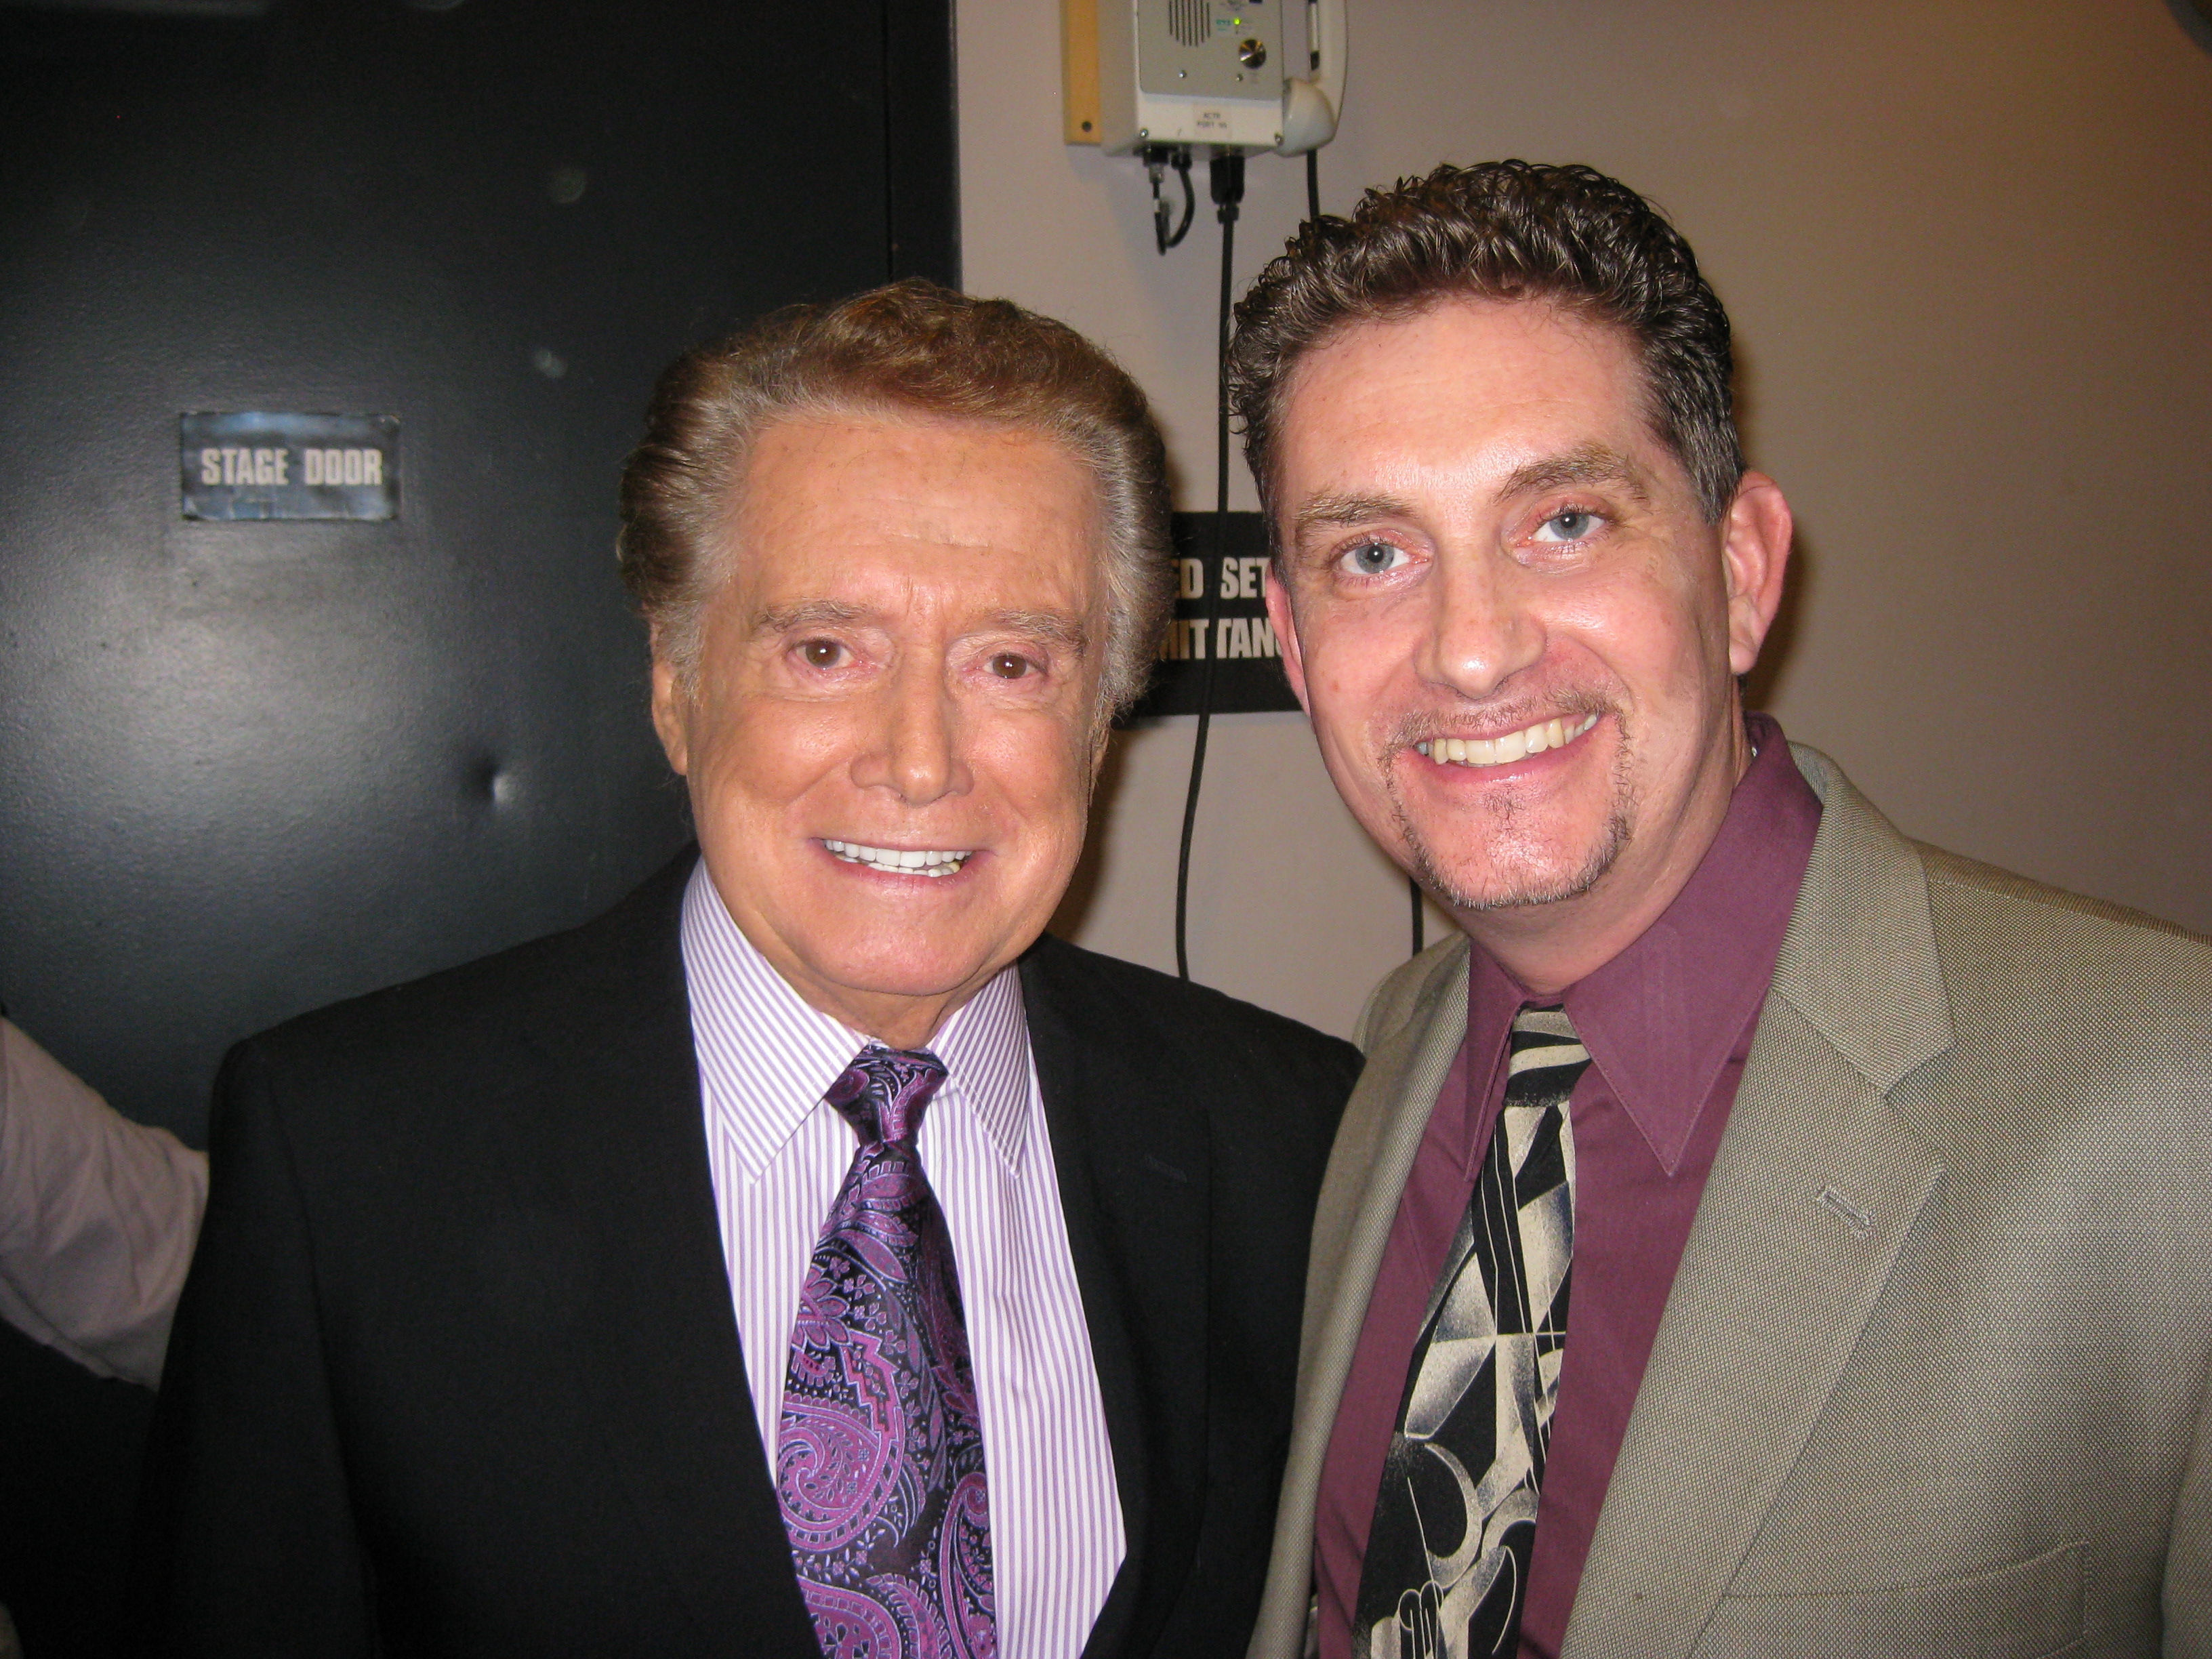 Regis Philbin and Michael Christaldi at The Late Show with David Letterman. NYC 9/12